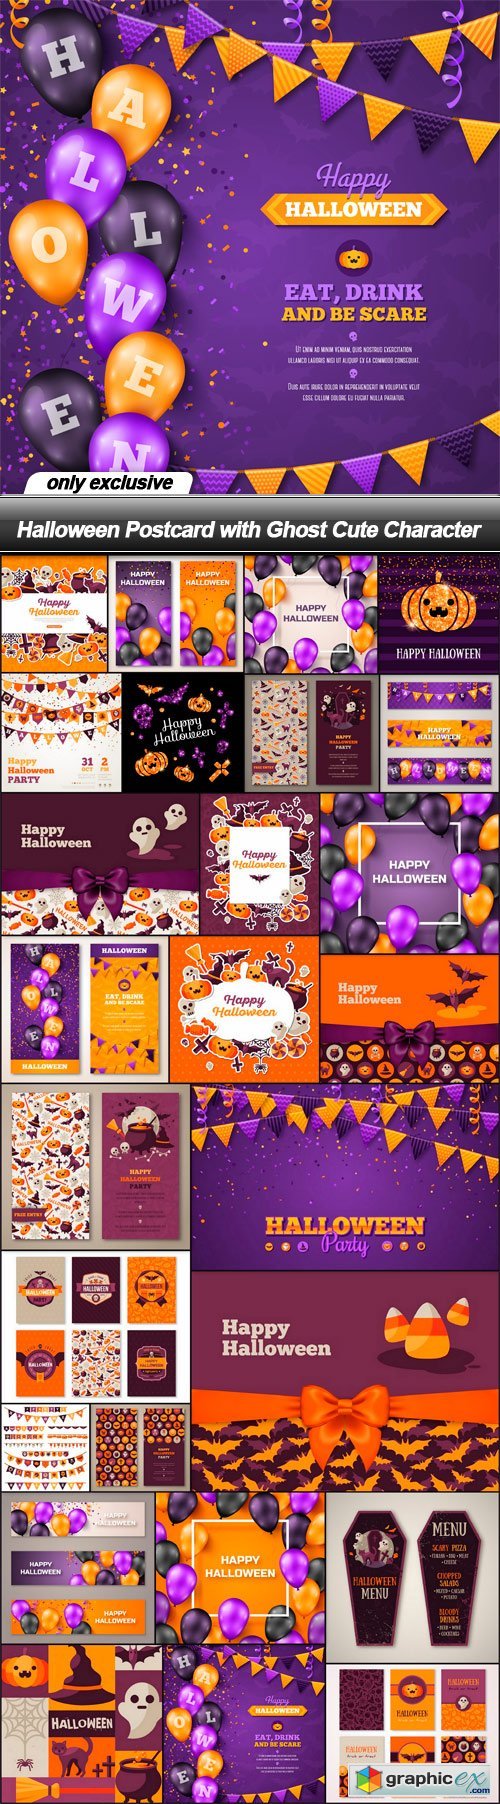 Halloween Postcard with Ghost Cute Character - 26 EPS